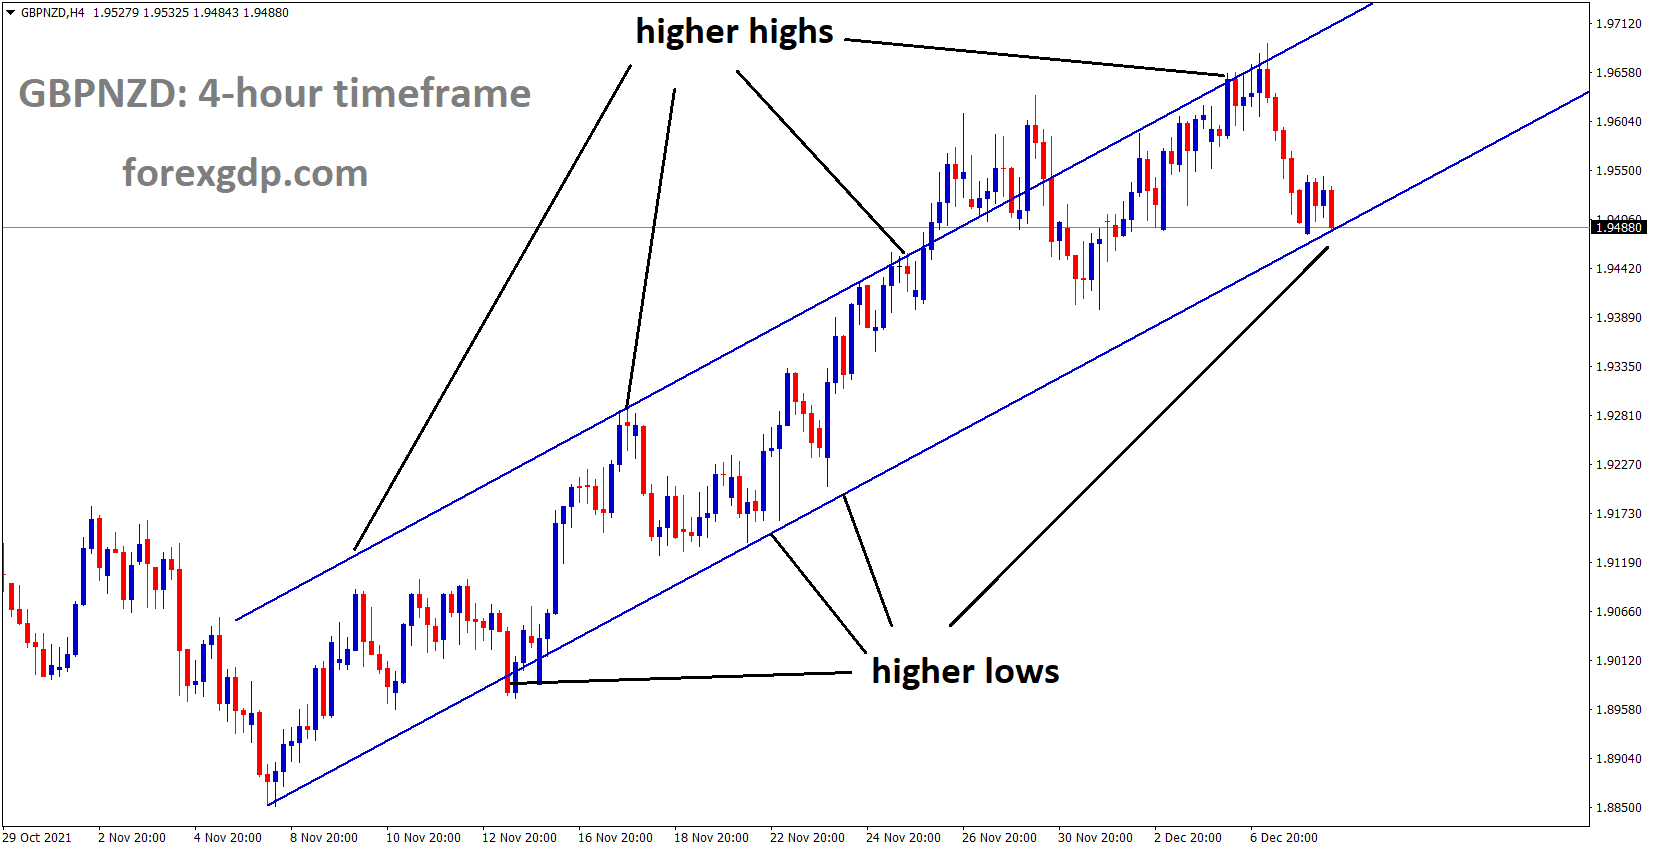 GBPNZD is moving in an ascending channel and the market has reached the higher low area of the channel